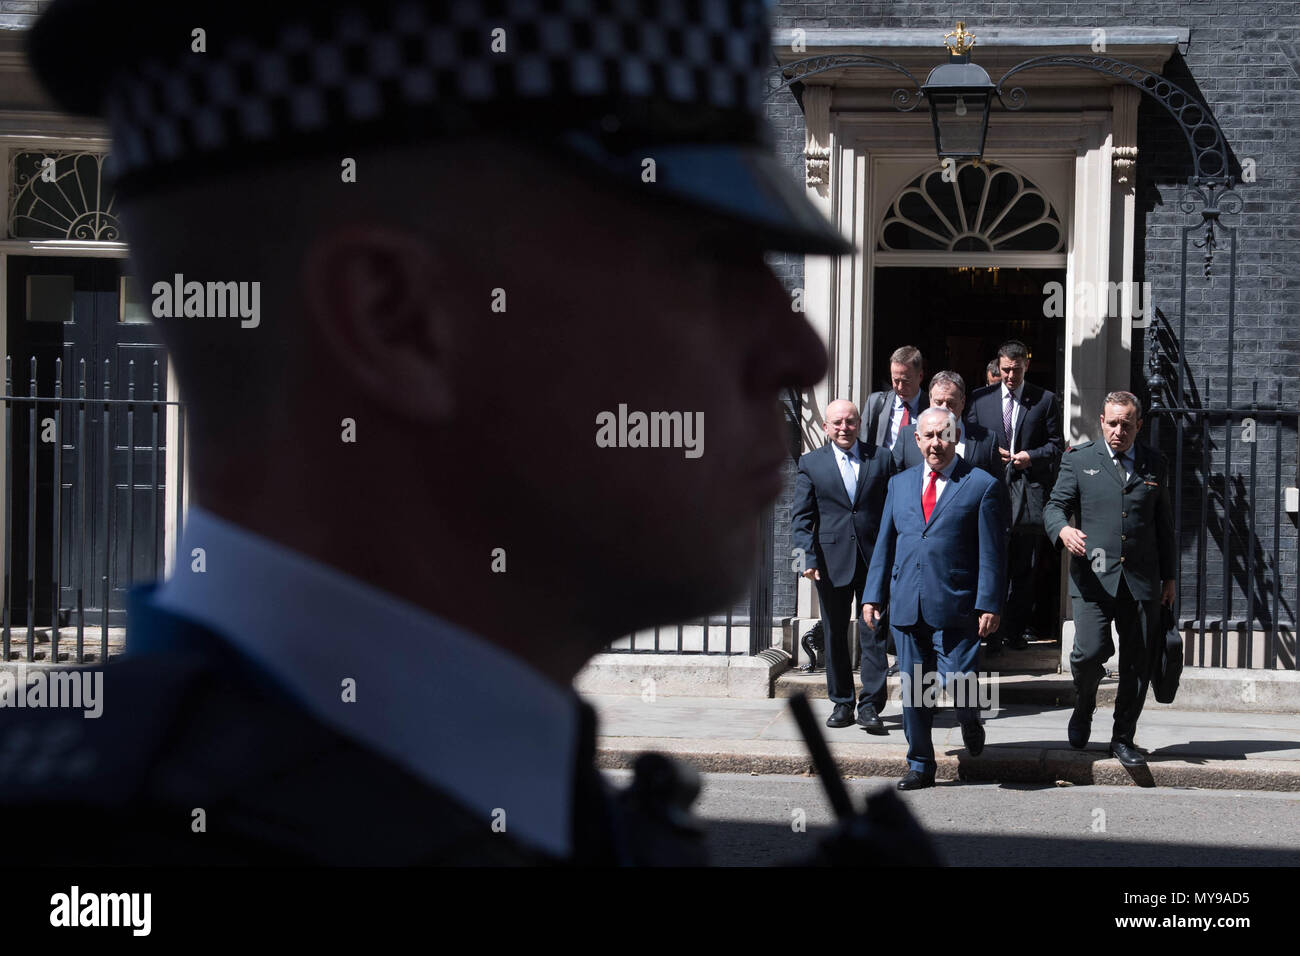 Israeli Prime Minister Benjamin Netanyahu leaves 10 Downing Street in London, after meeting Prime Minister Theresa May. Stock Photo